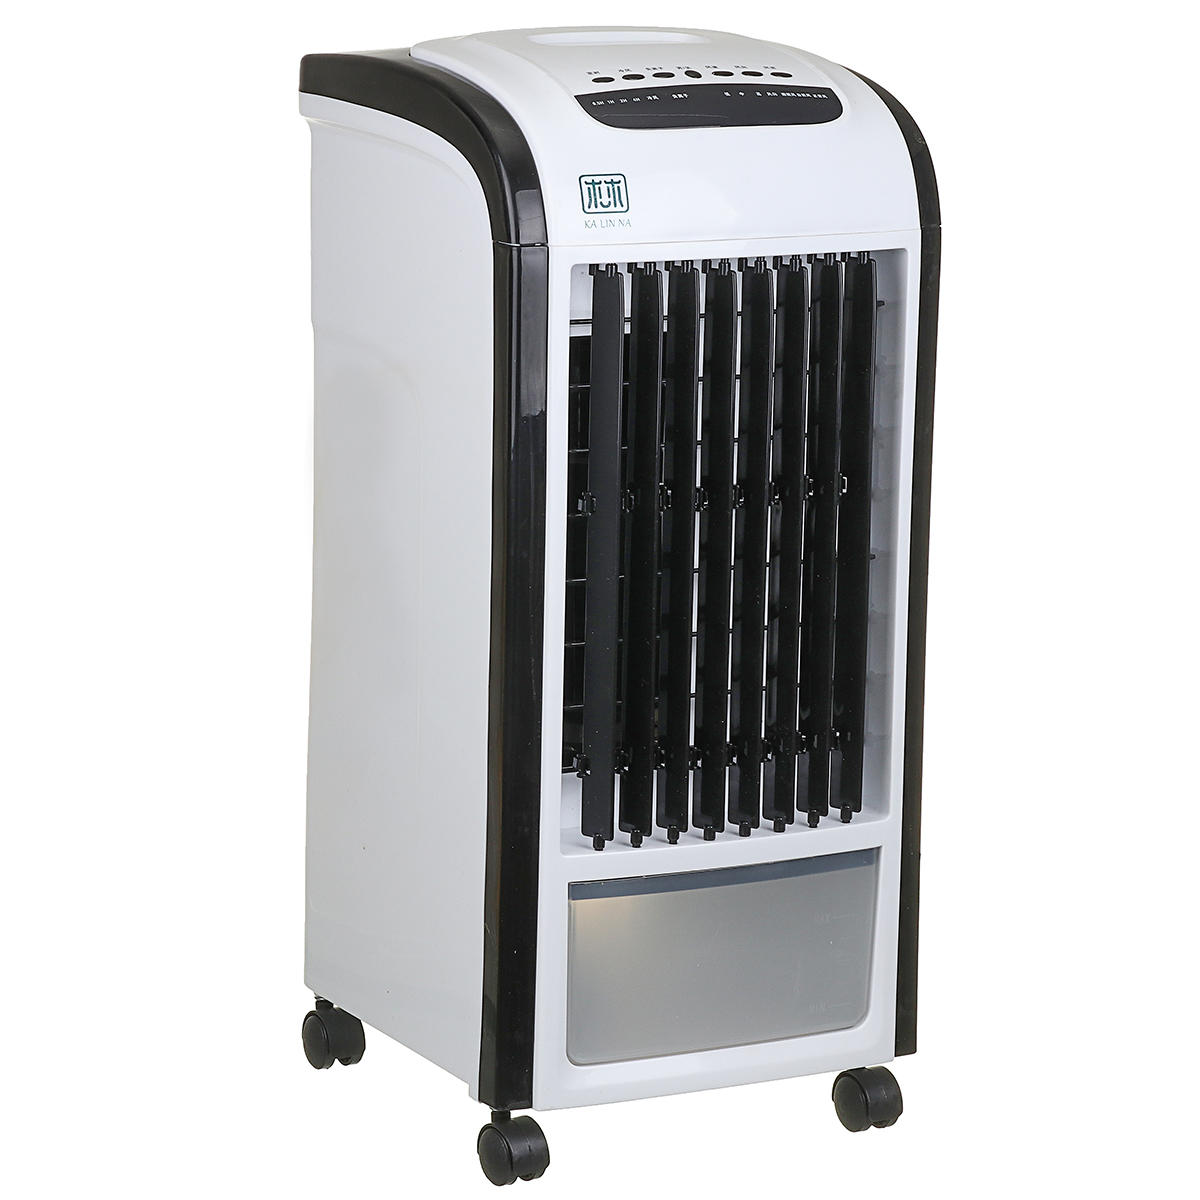 

60W 220V Evaporative Air Cooler Portable Fan Conditioner 3 Wind Gear Adjustment 3.5L Water Tank Cooling Air Purifiers Re